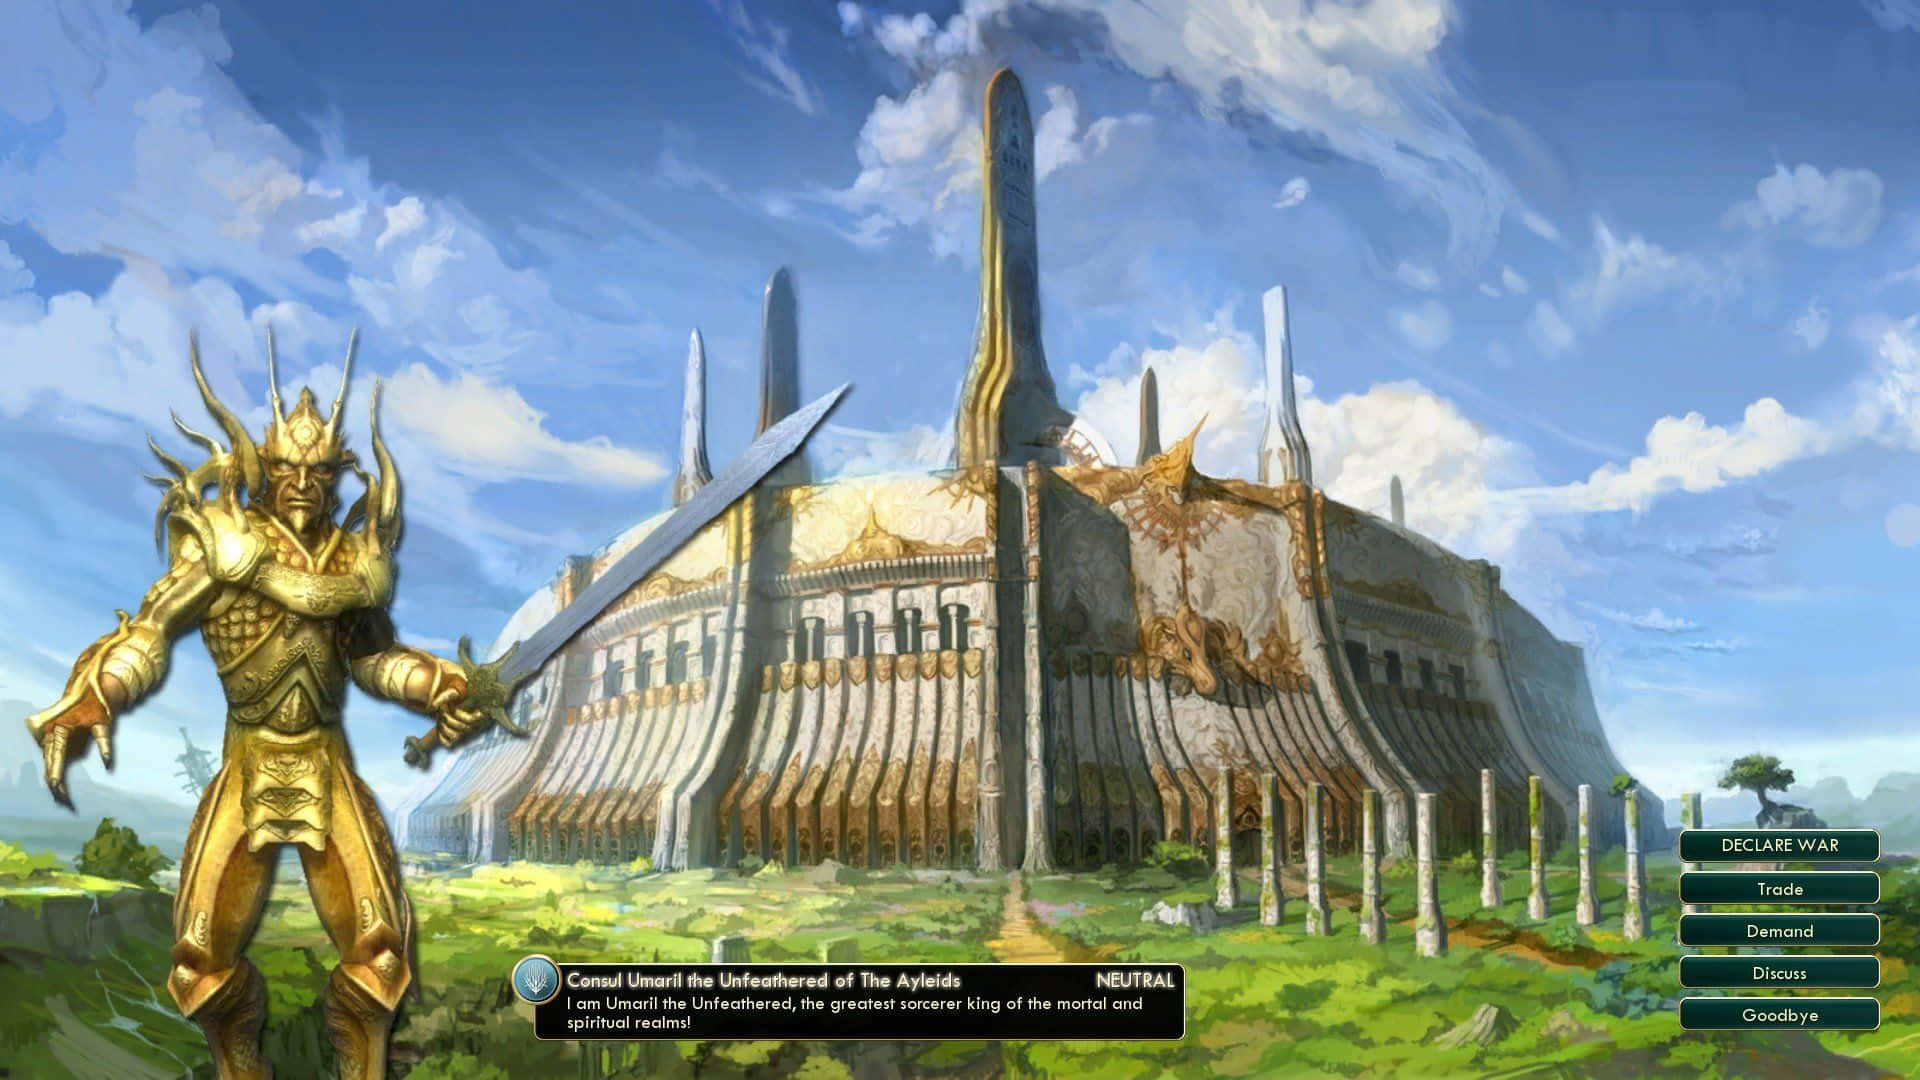 A Screenshot Of A Game With A Golden Statue And A Castle